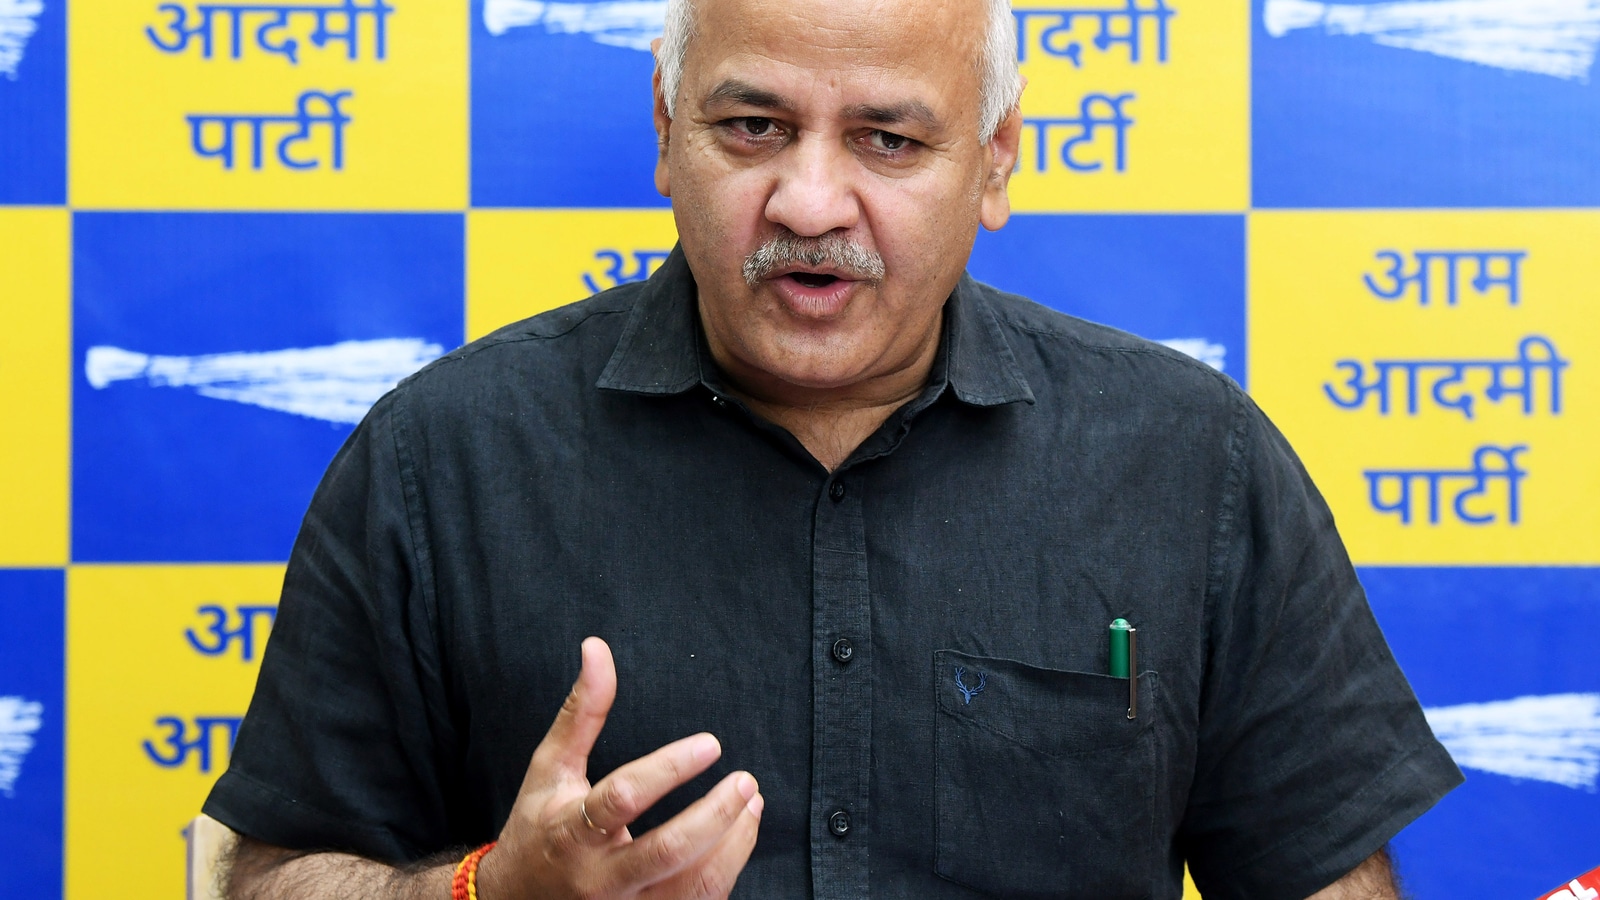 AAP aims to provide ‘dignified education spaces’ in Delhi govt schools: Sisodia